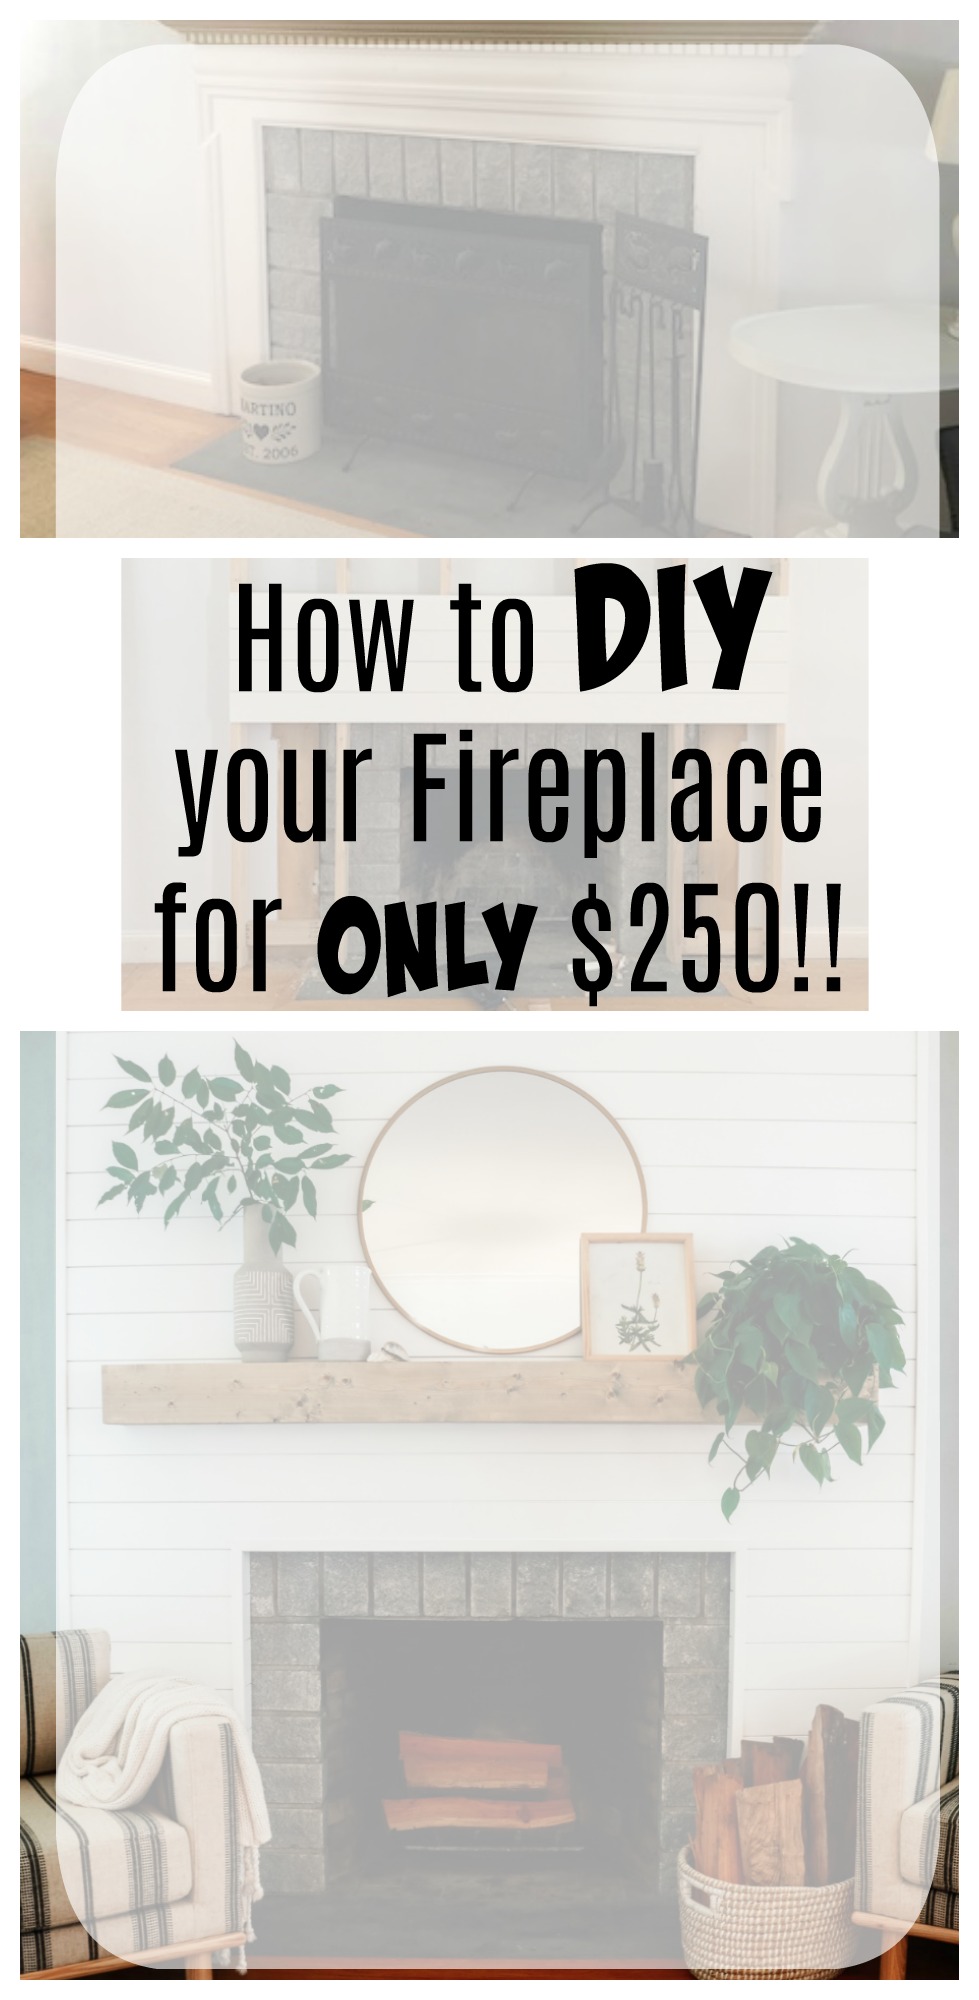 Diy Fireplace Mantel Ideas Elegant Shiplap Fireplace and Diy Mantle Ditched the Old